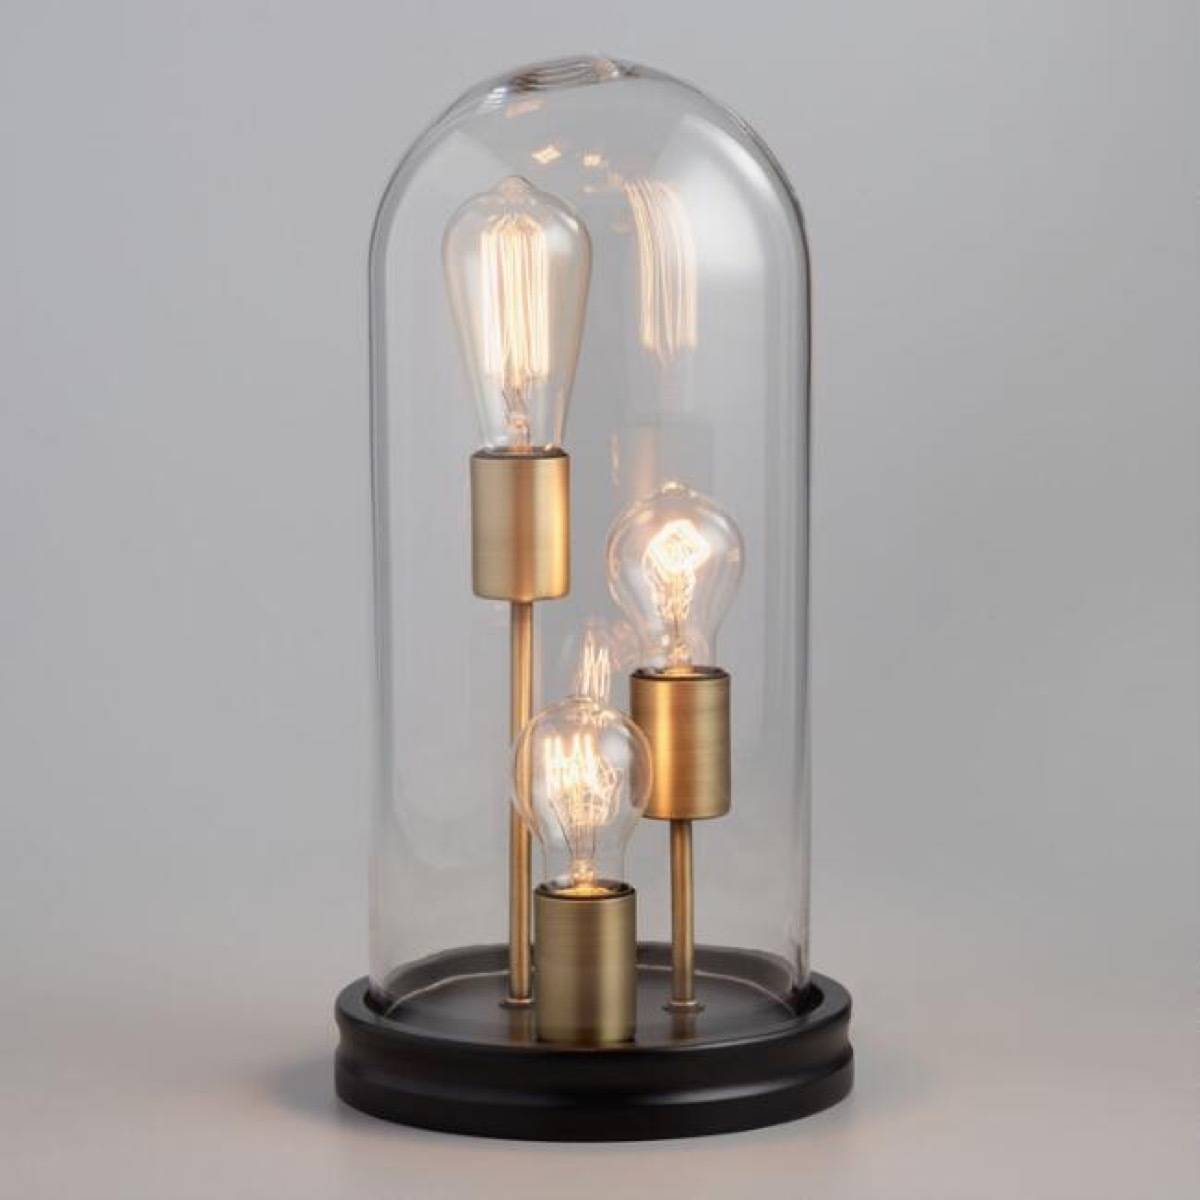 Edison bulb table lamp from Cost Plus World Market